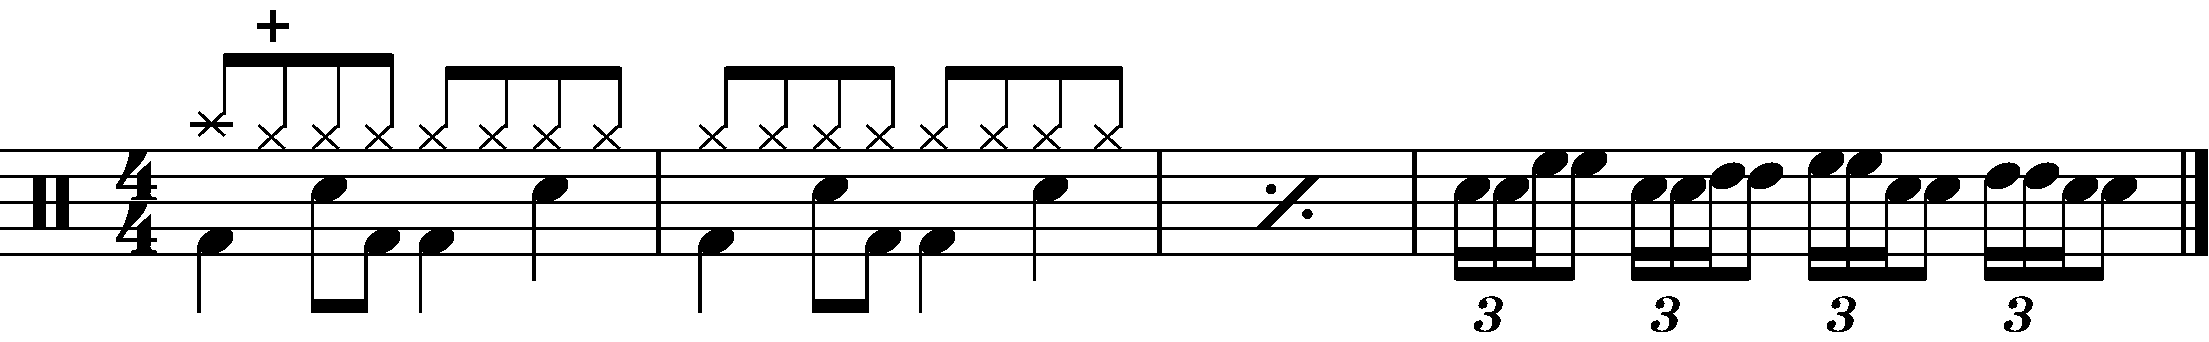 A four bar phrased using a four stroke roll fill